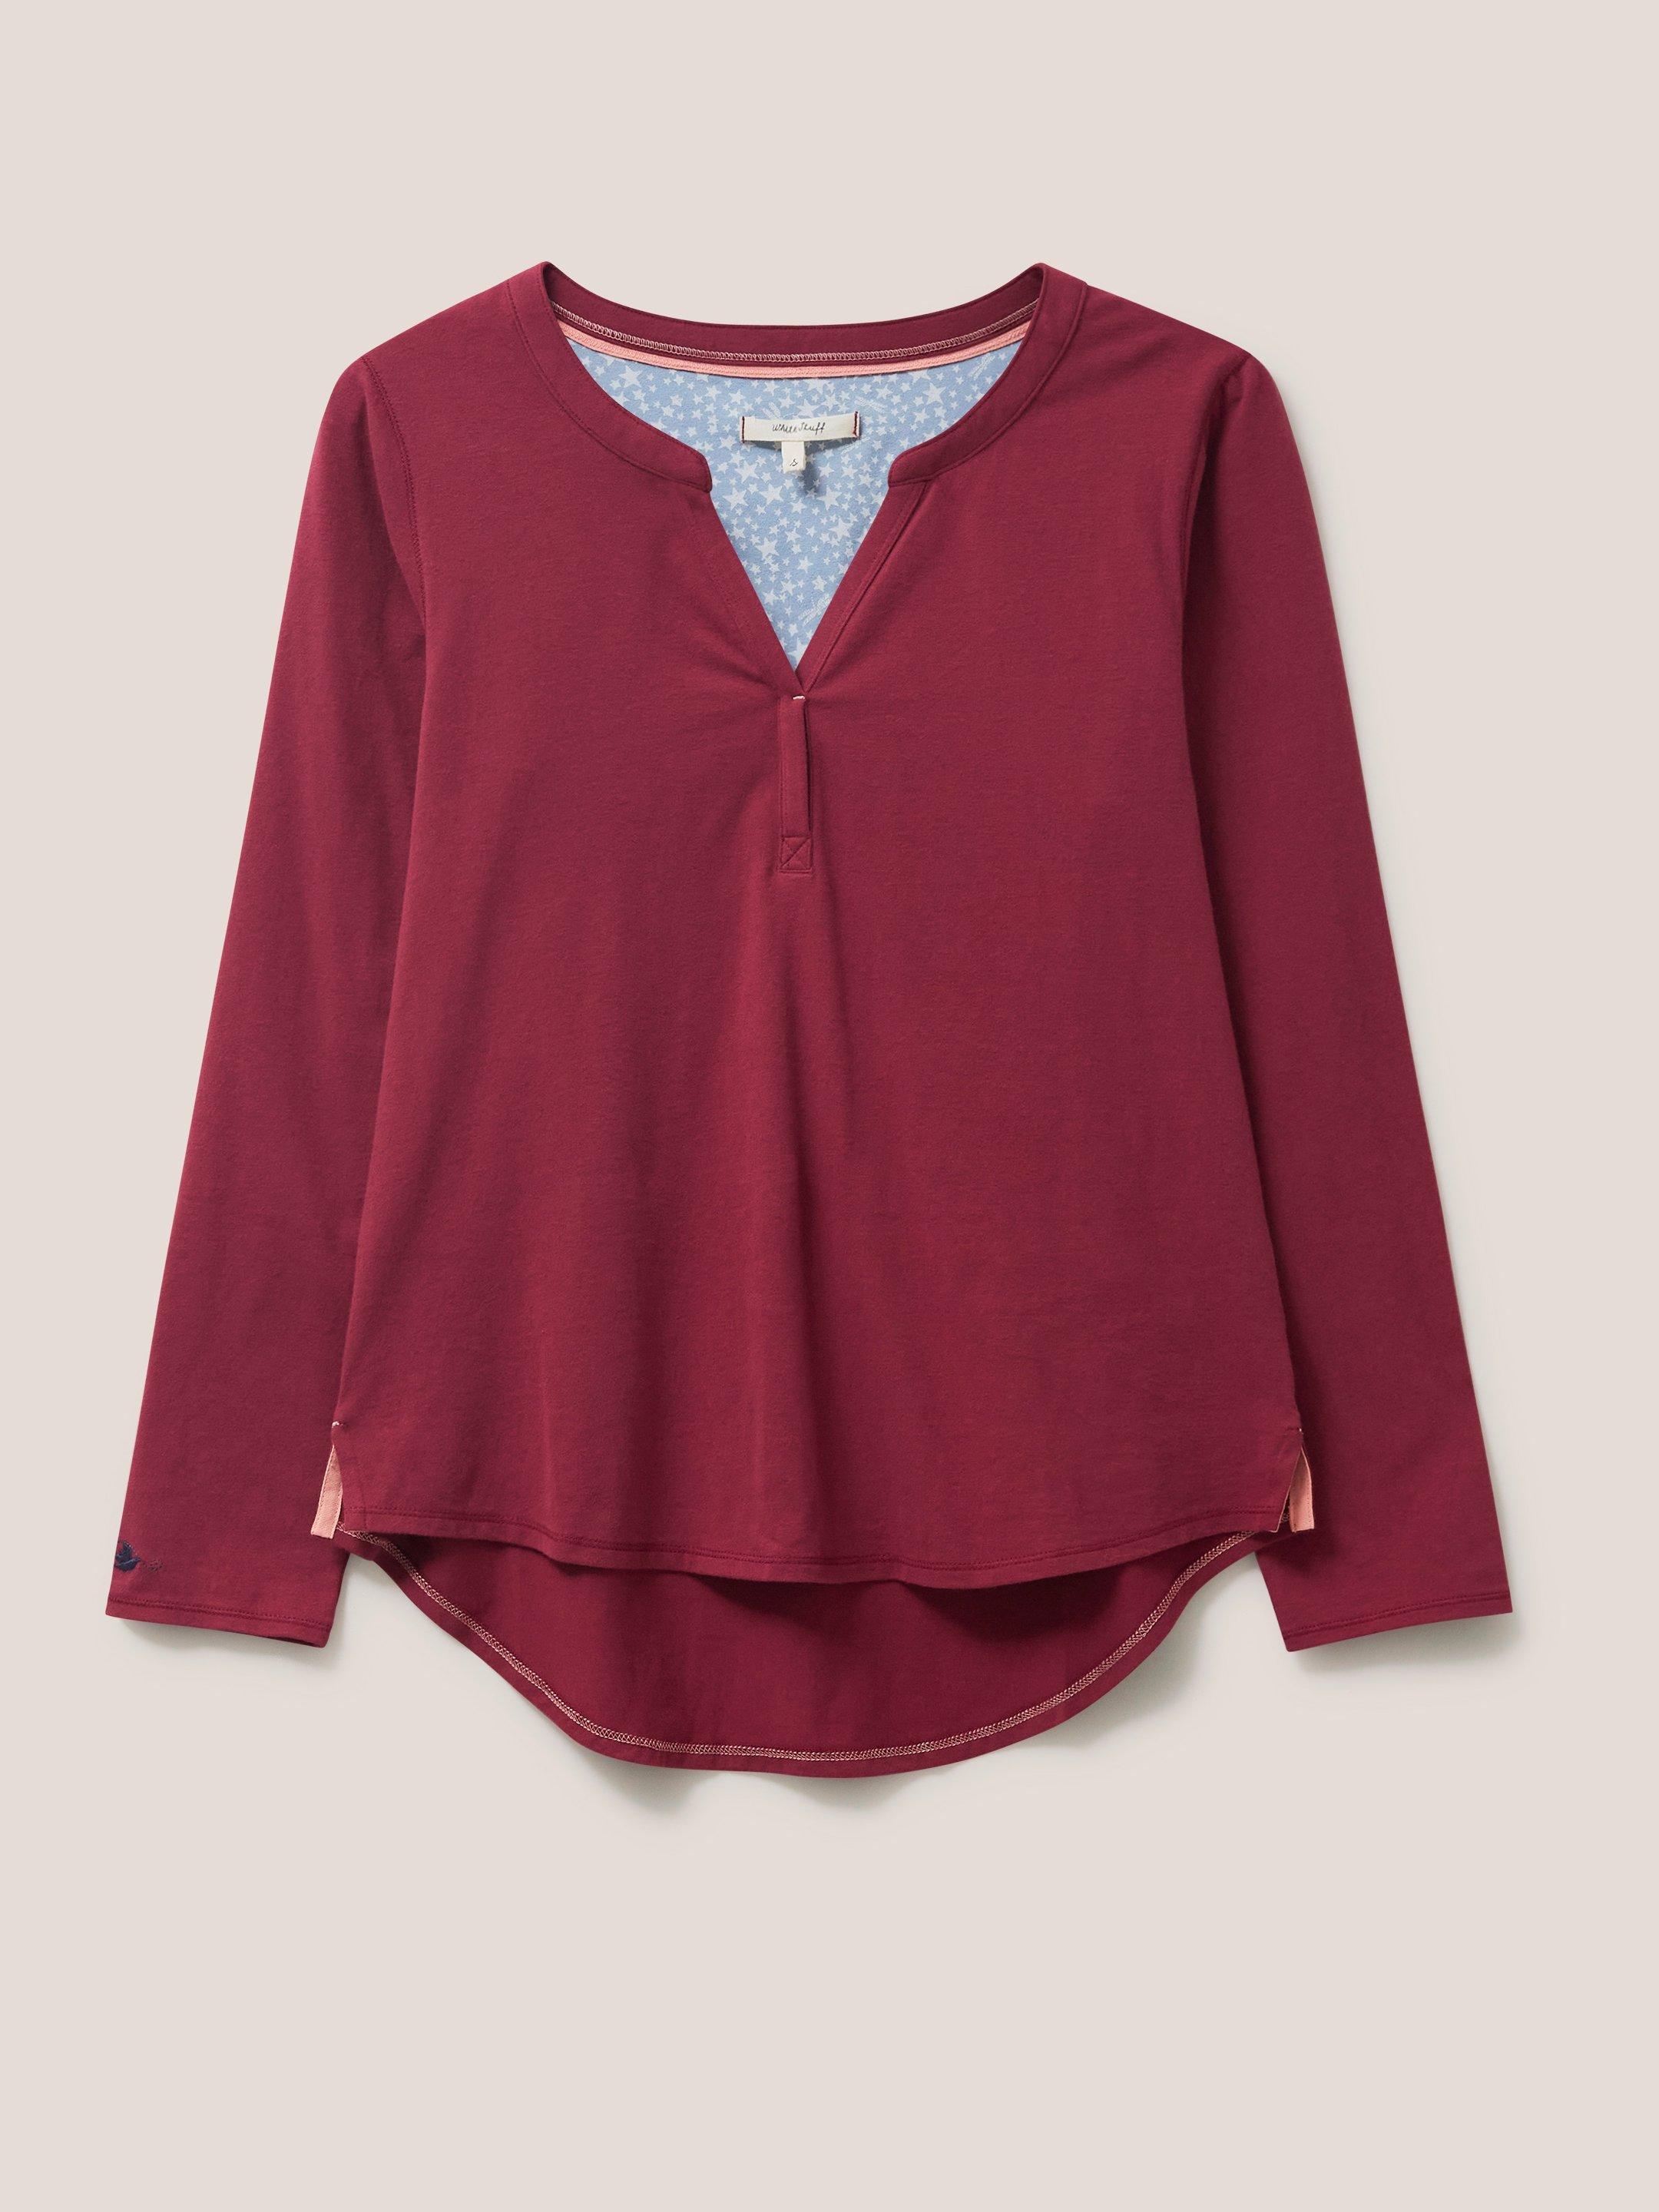 Berry PJ Top in DEEP RED - FLAT FRONT